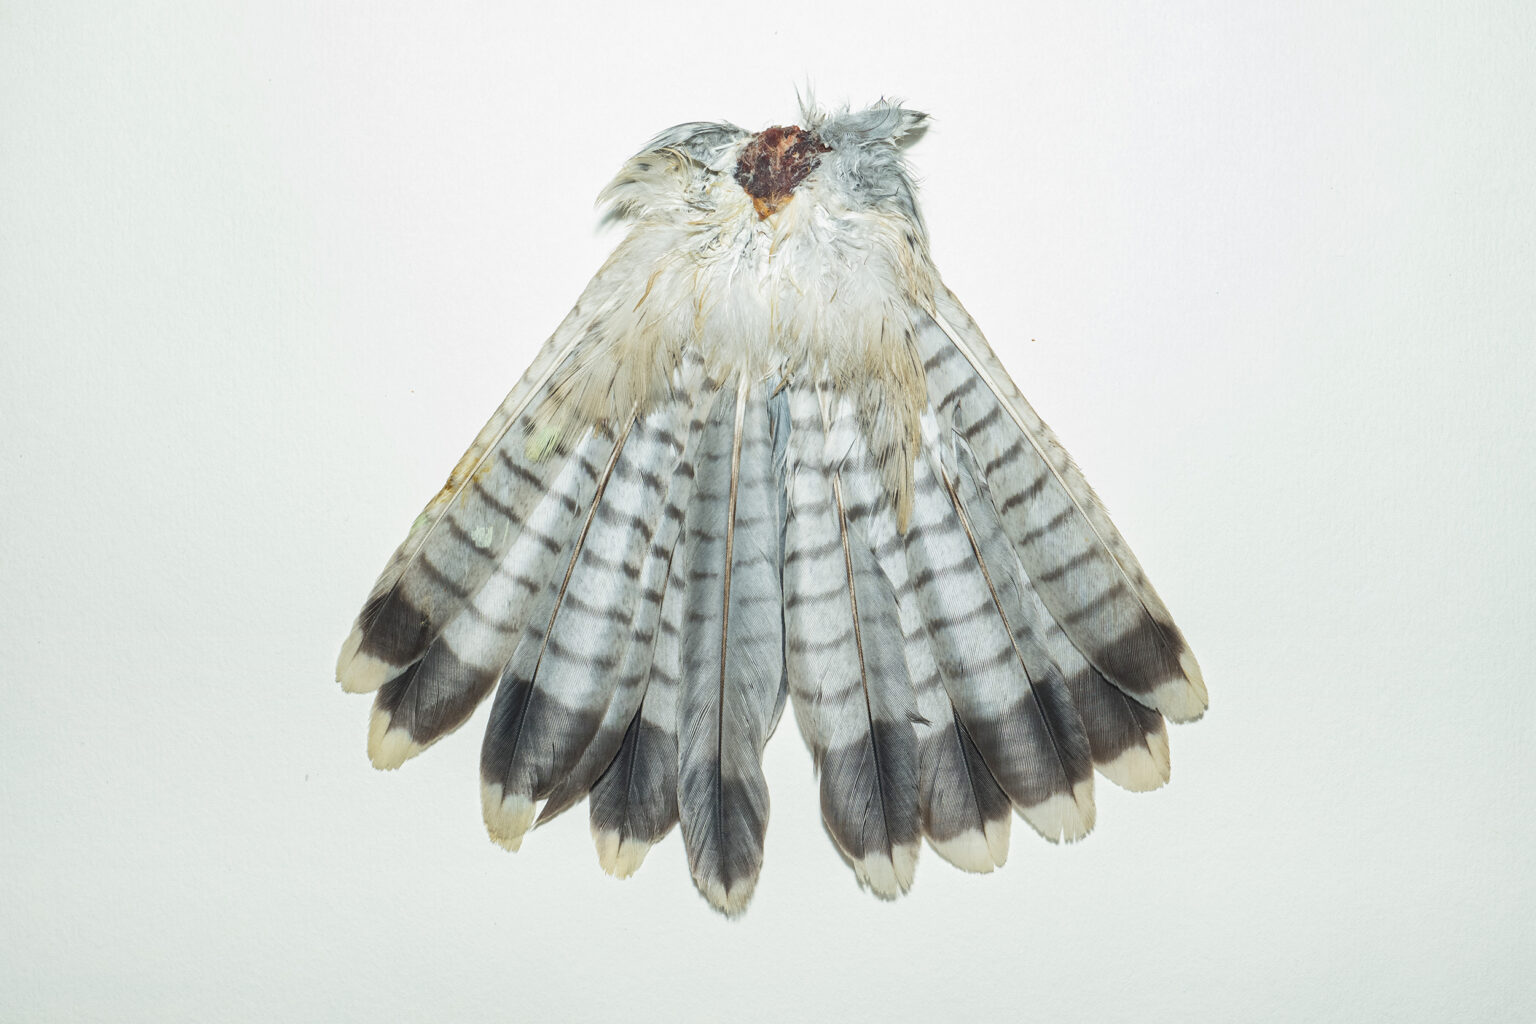 Tail - Ventral View